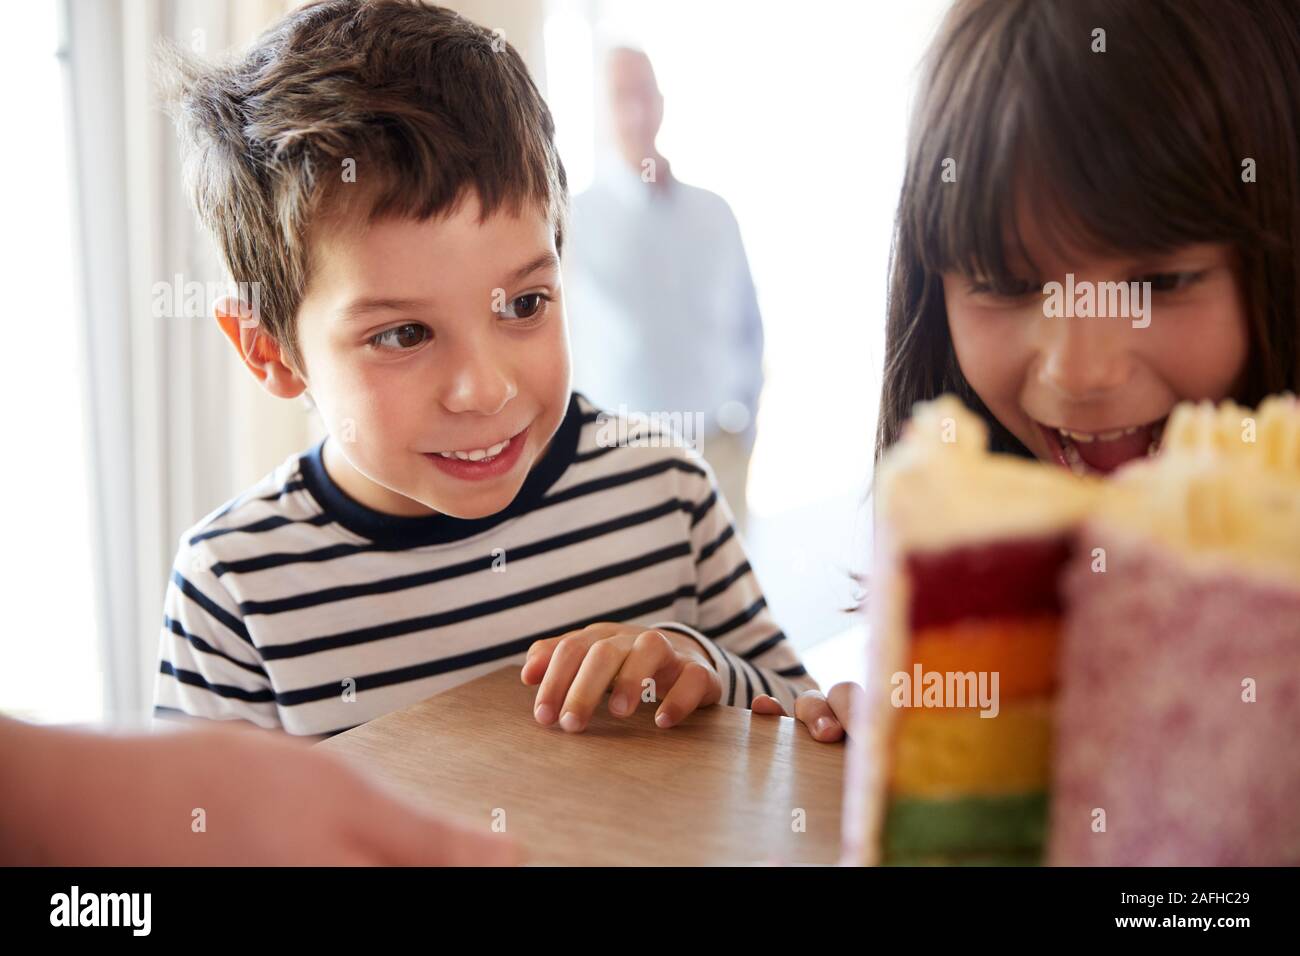 Young siblings looking at a colourful sliced birthday cake on a table, close up, selective focus Stock Photo